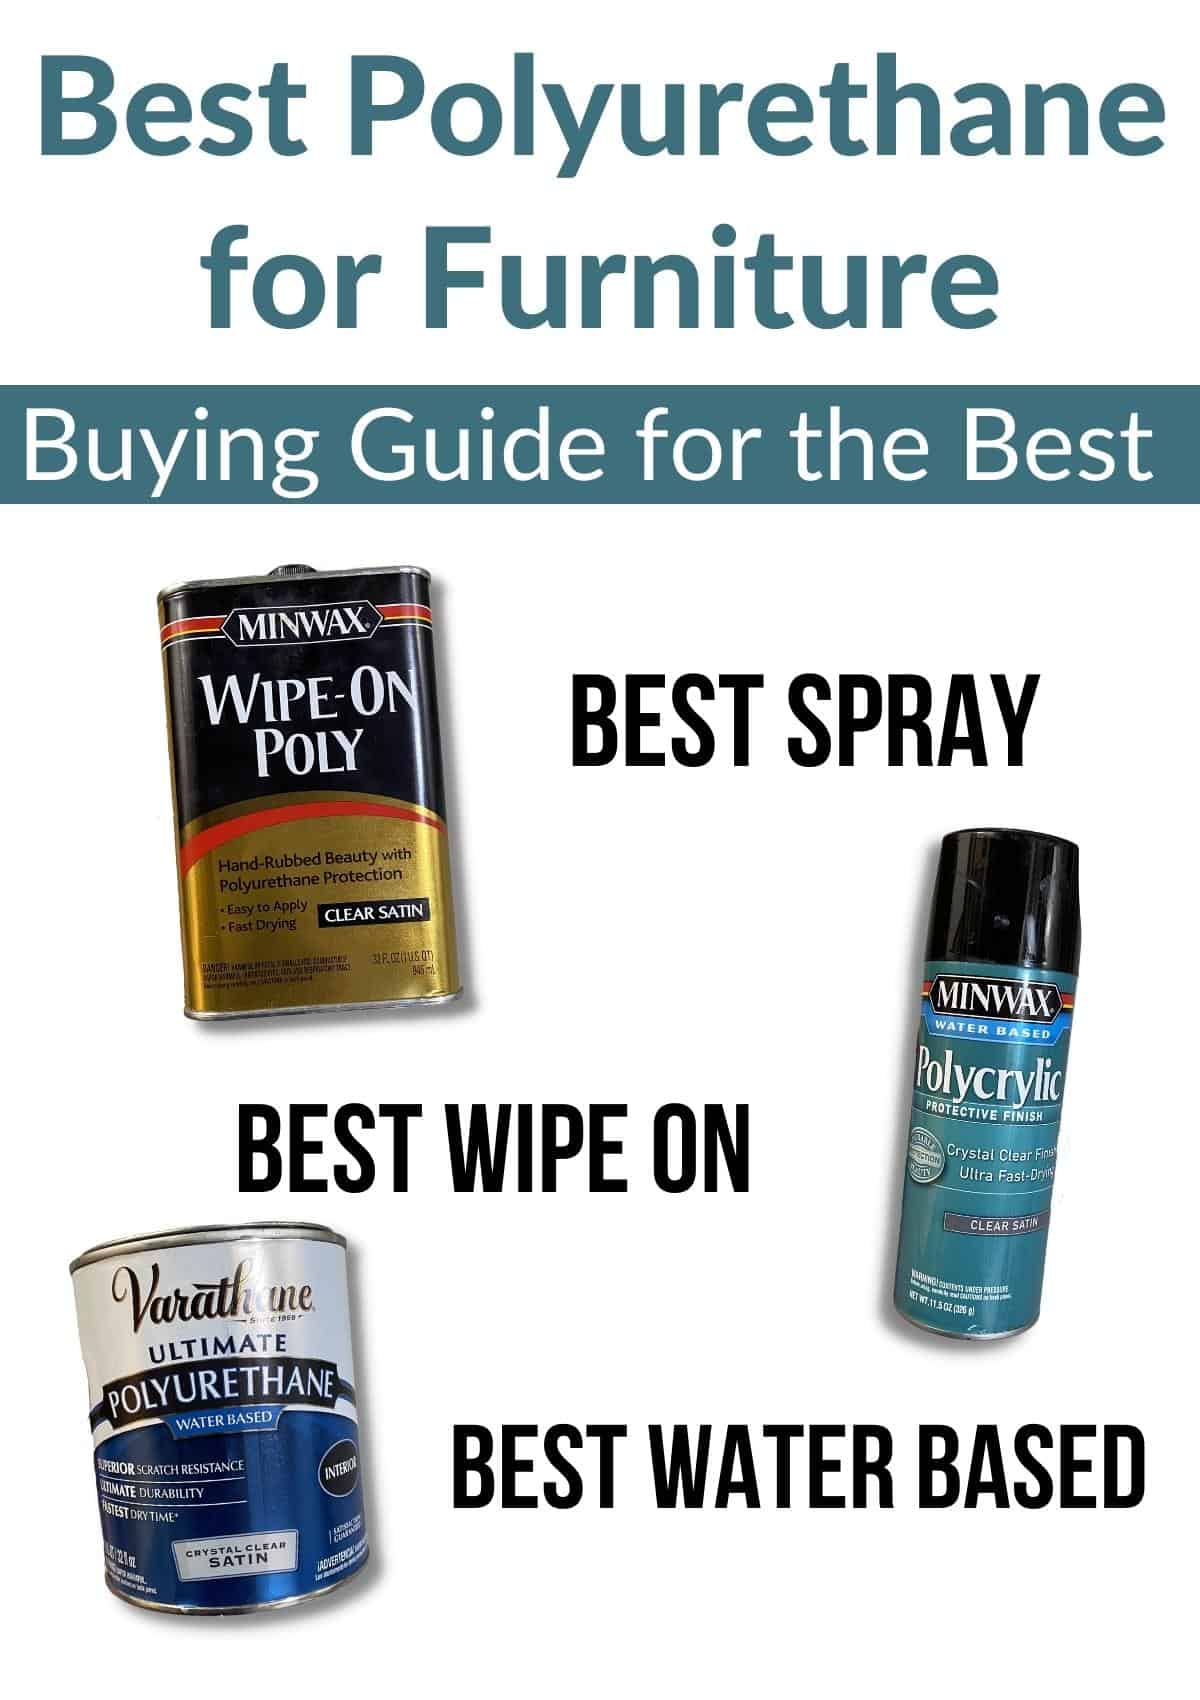 What’s the Best Polyurethane for Furniture?